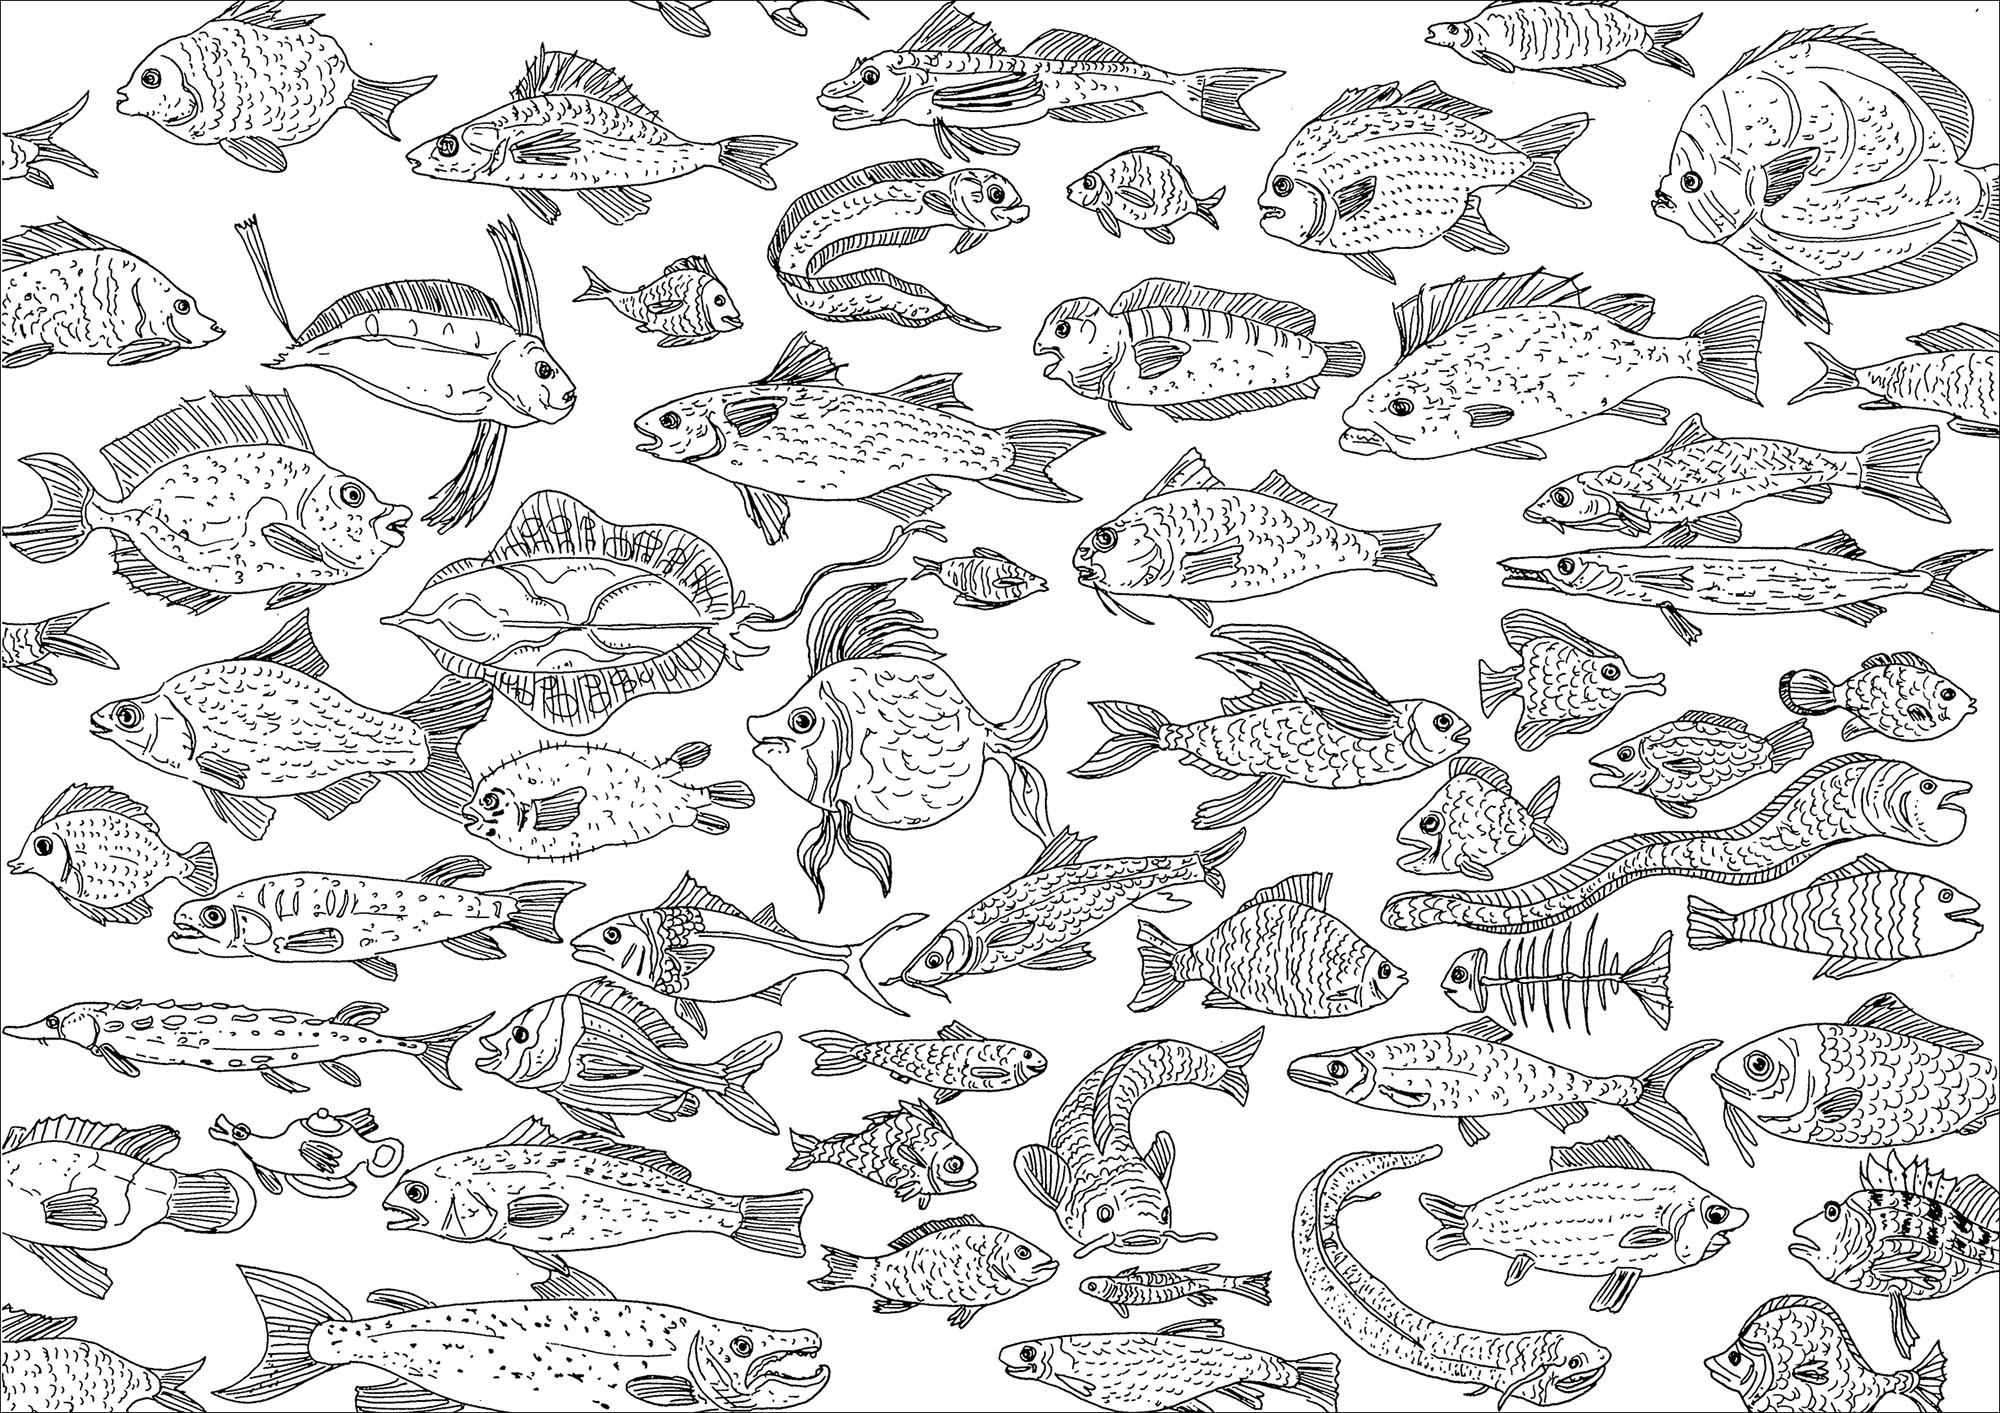 Incredible fishes swimming in the sea, just waiting for colors, Artist : Frédéric Brogard